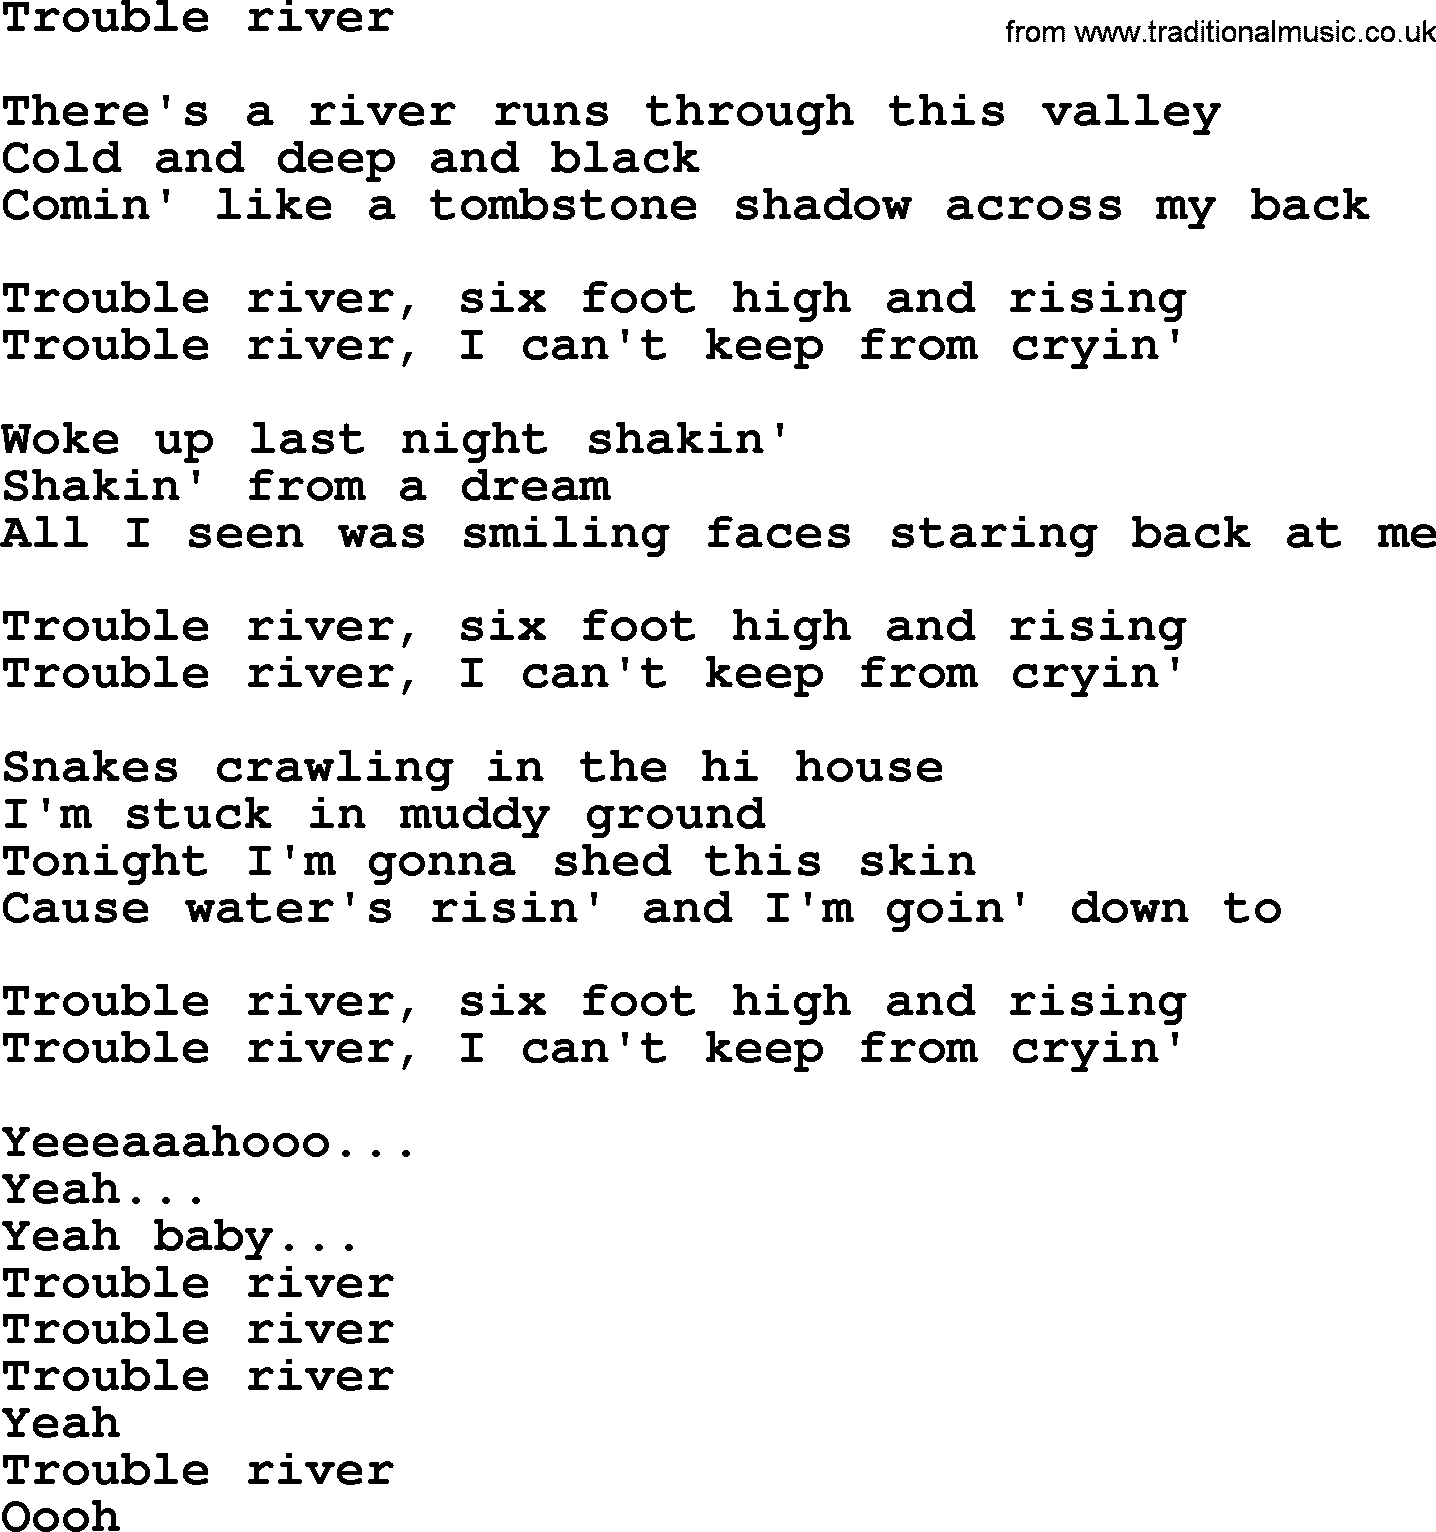 Bruce Springsteen song: Trouble River lyrics